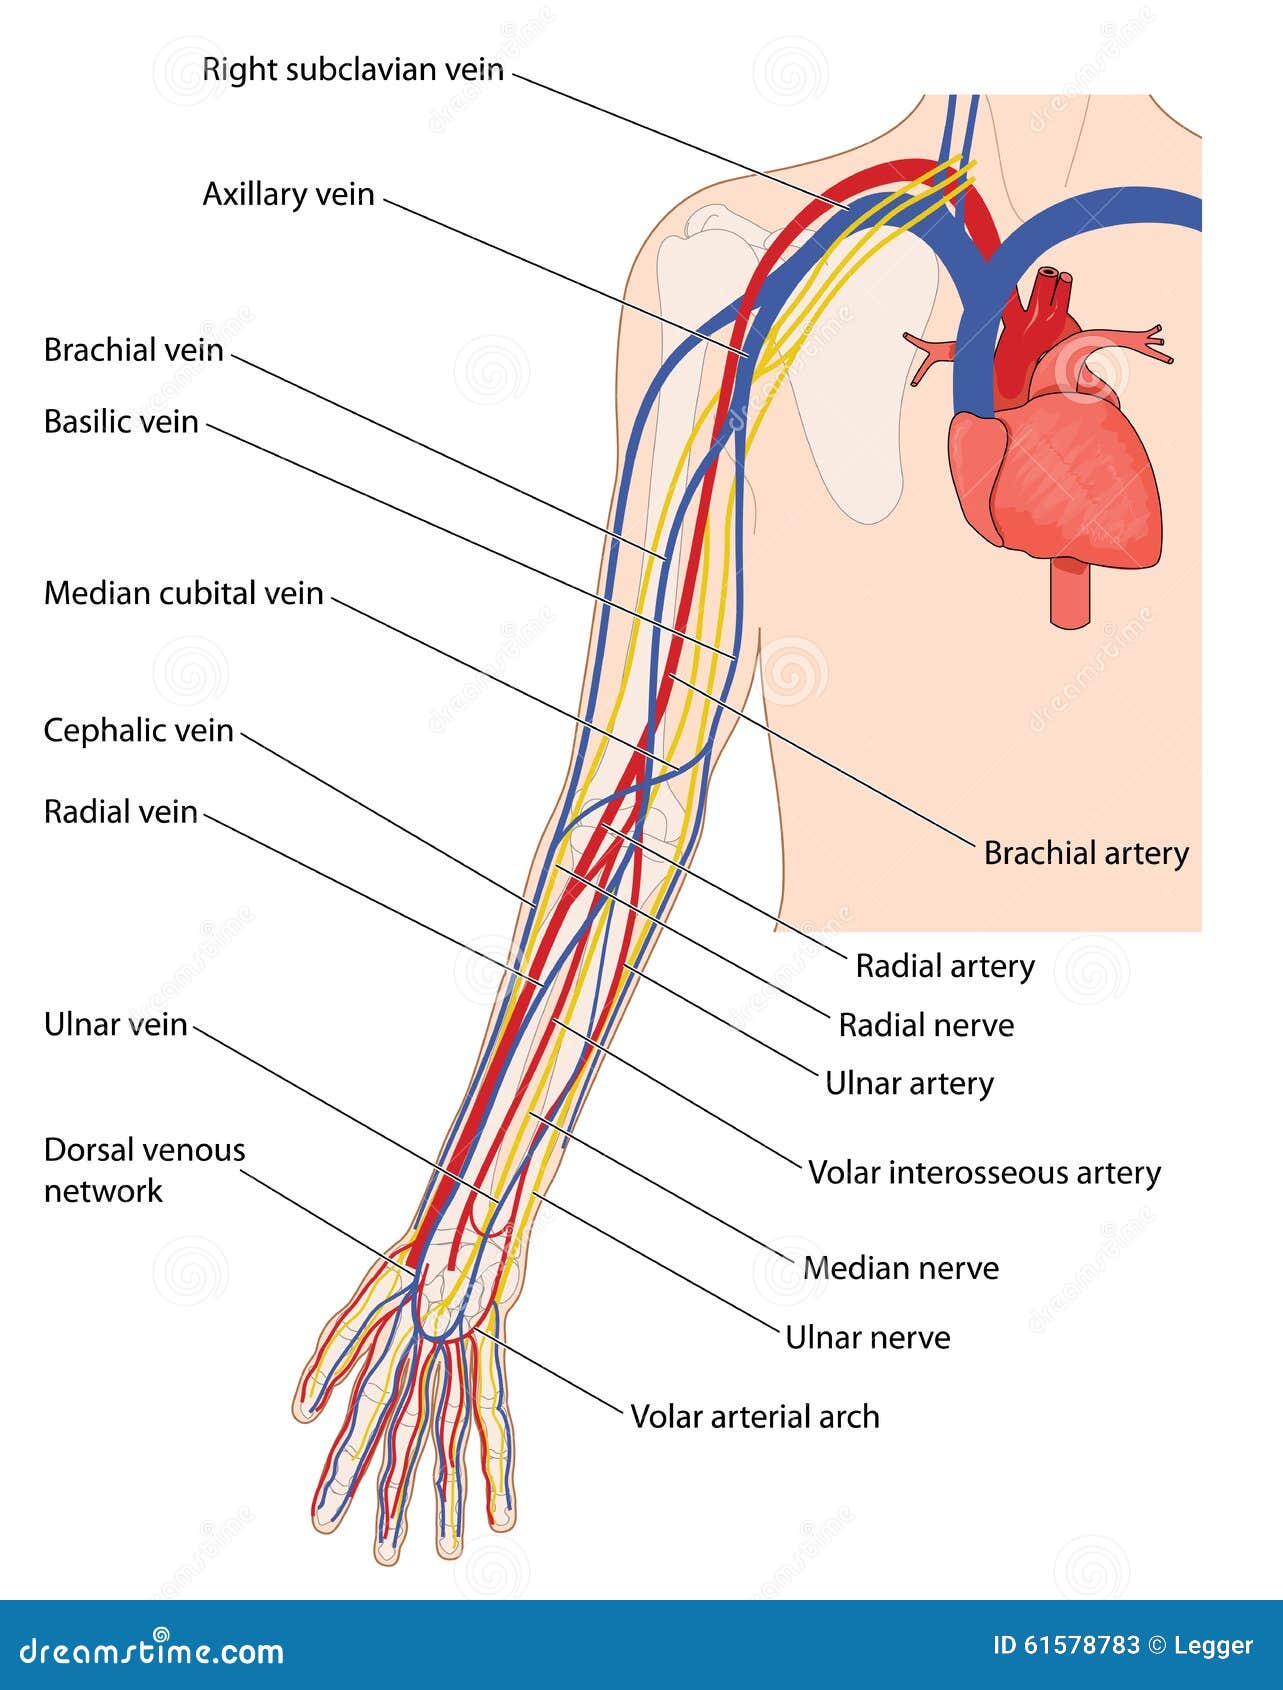 blood vessels and nerves of the arm